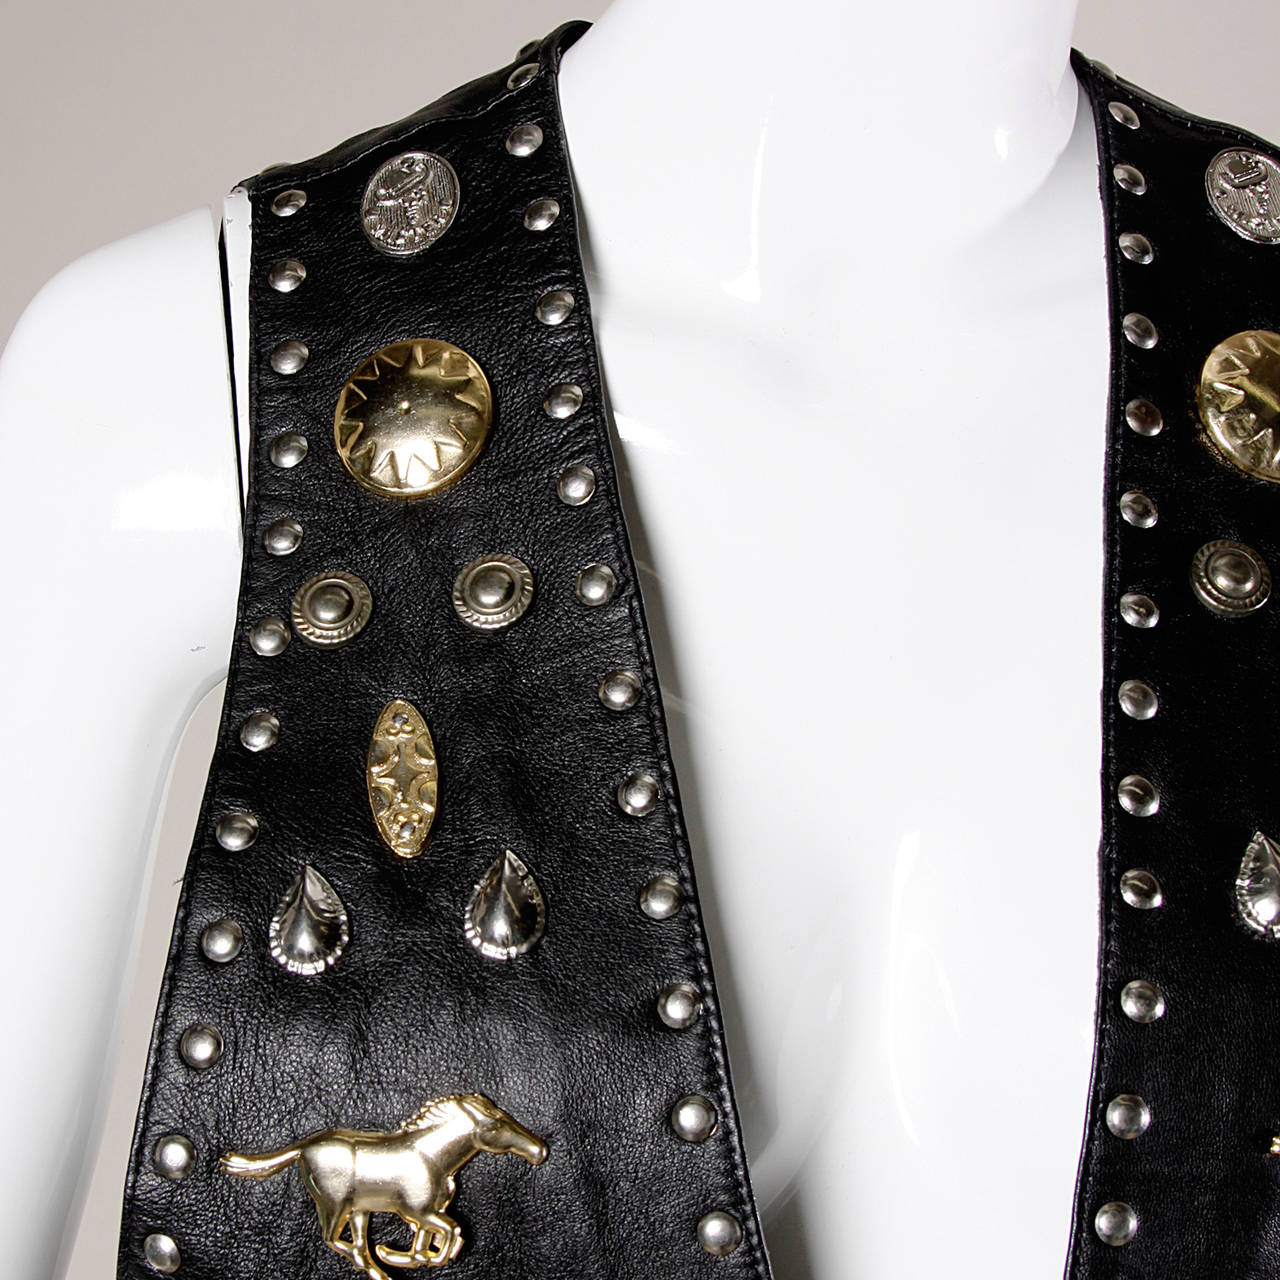 Unique vintage leather vest with oversized novelty studwork featuring horses, cowboy boots and conchos. Heavy and hand made!

Details:

Fully Lined
No Closure
Marked Size: Not Marked
Estimated Size: Free
Color: Black/ Silver and Gold